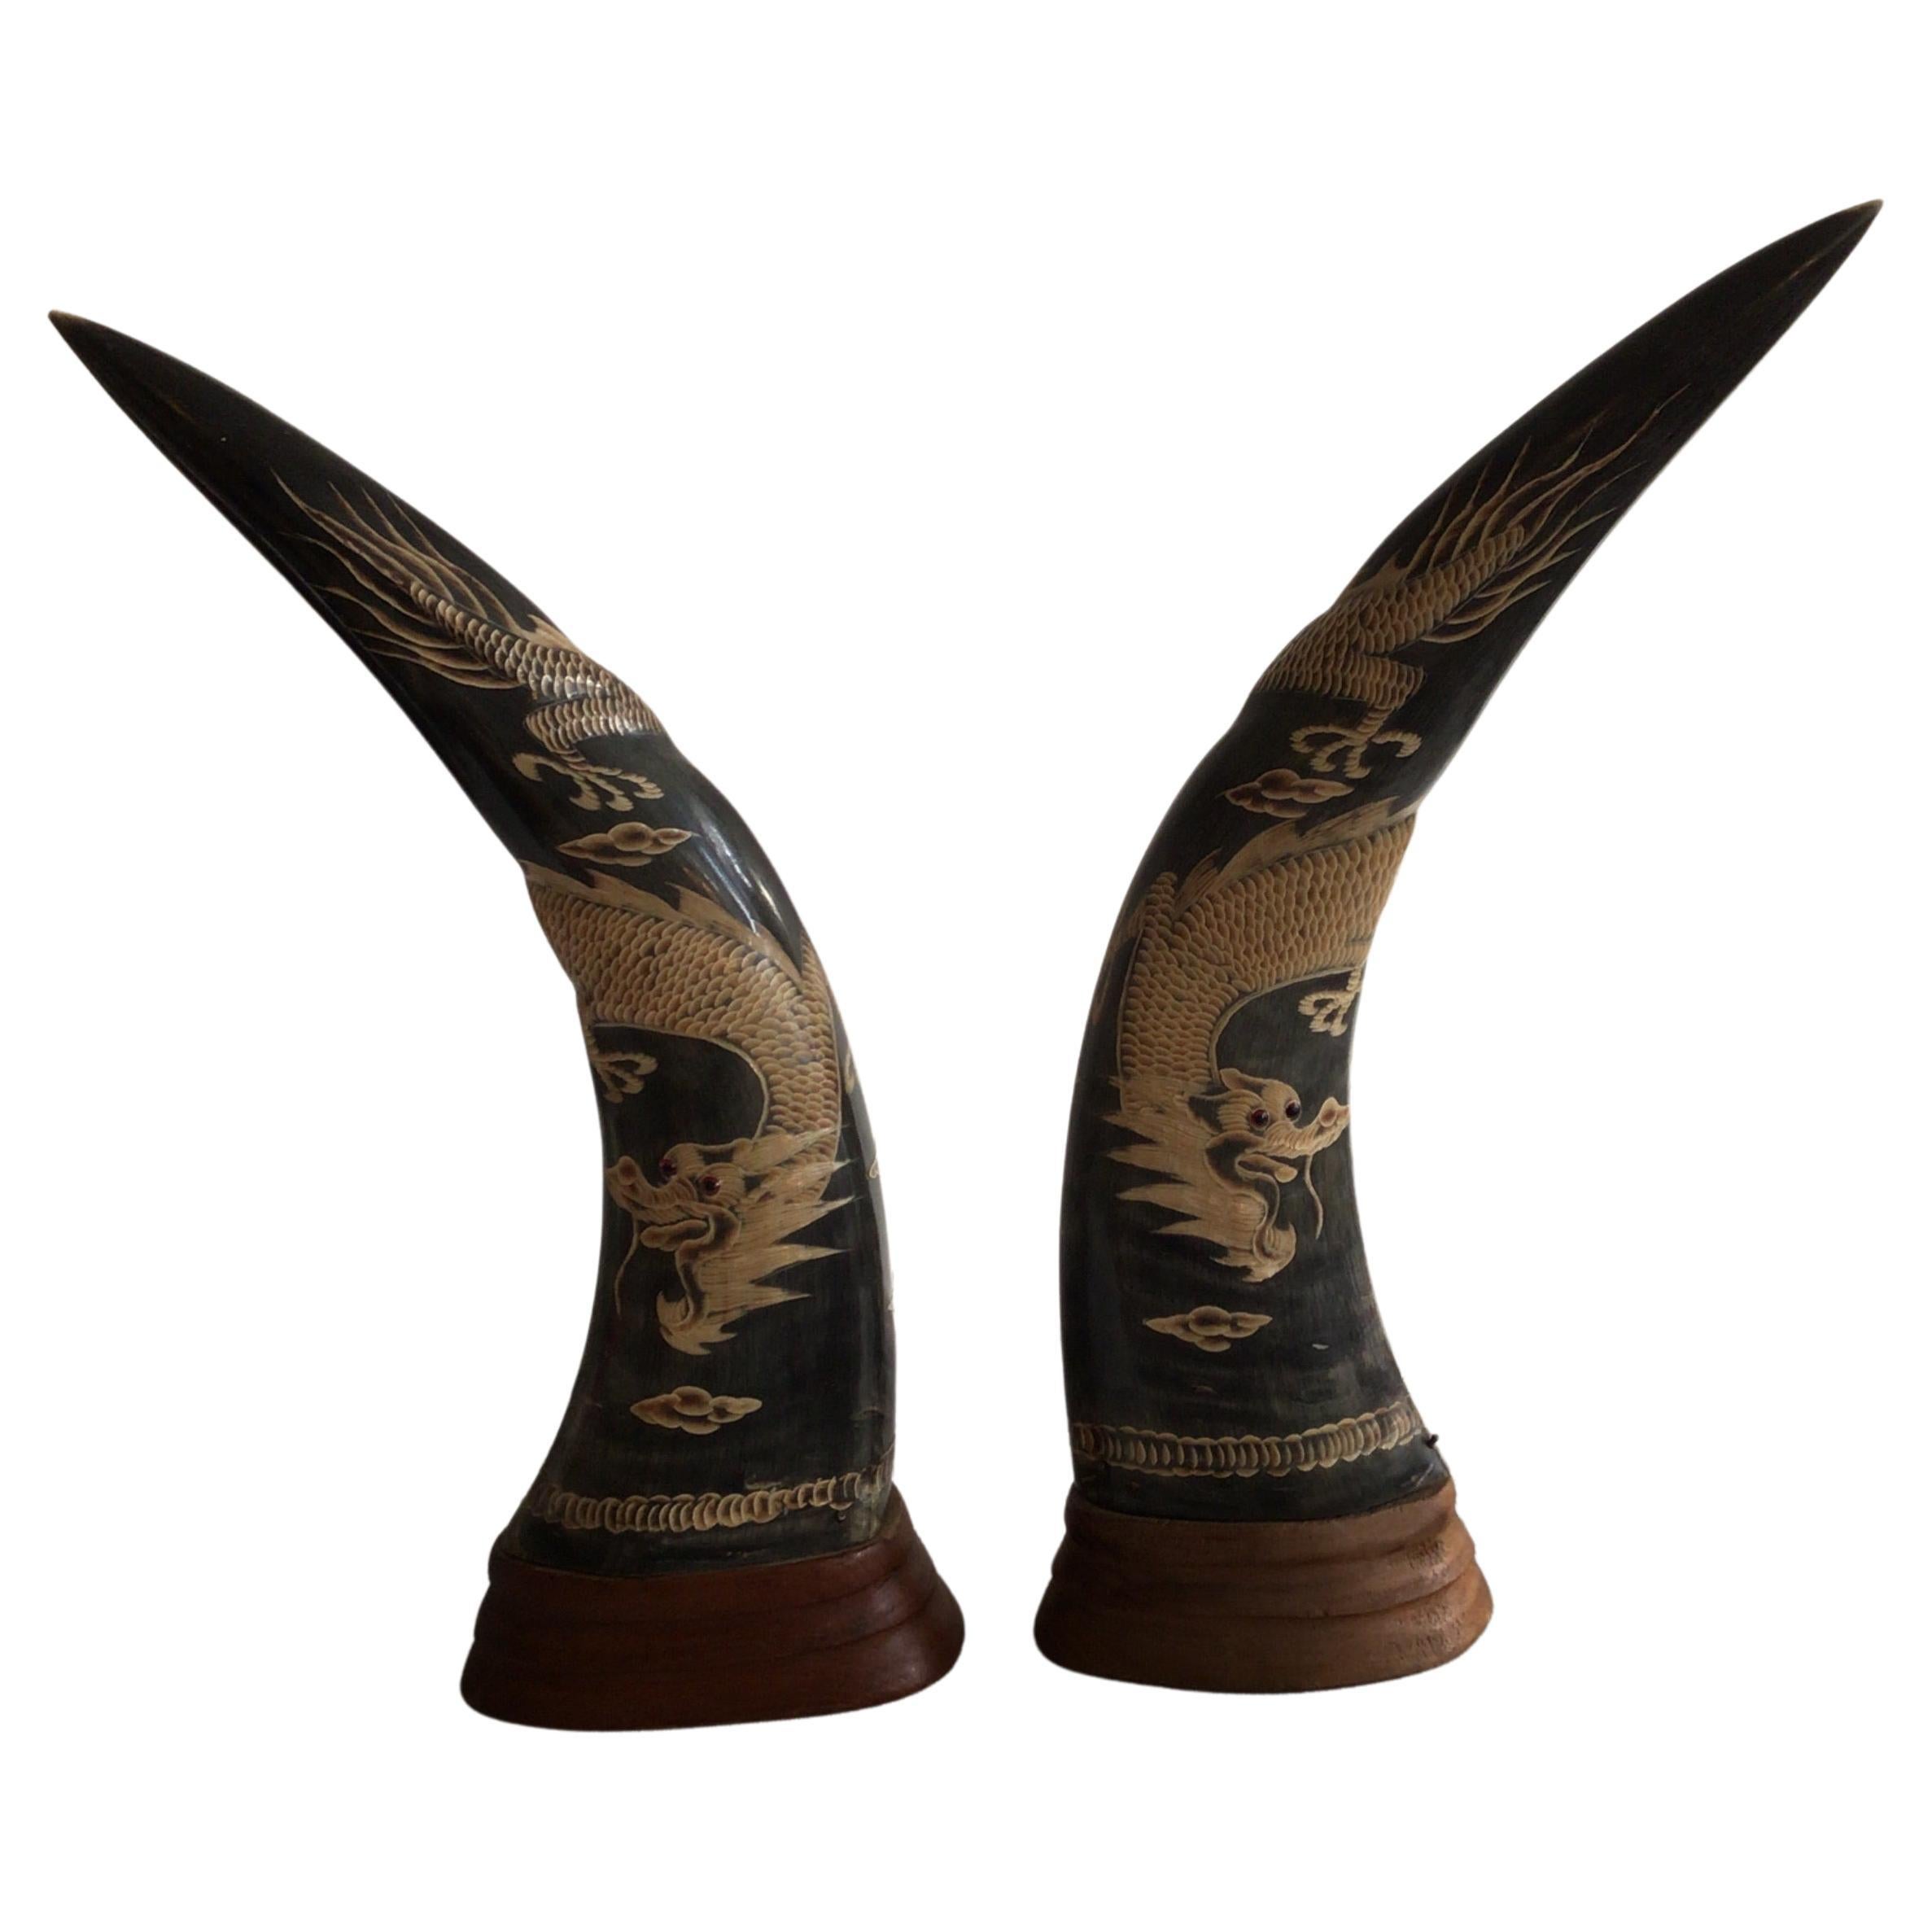 Pair of 1950s Carved Horns with Dragon Motif on Wood Base